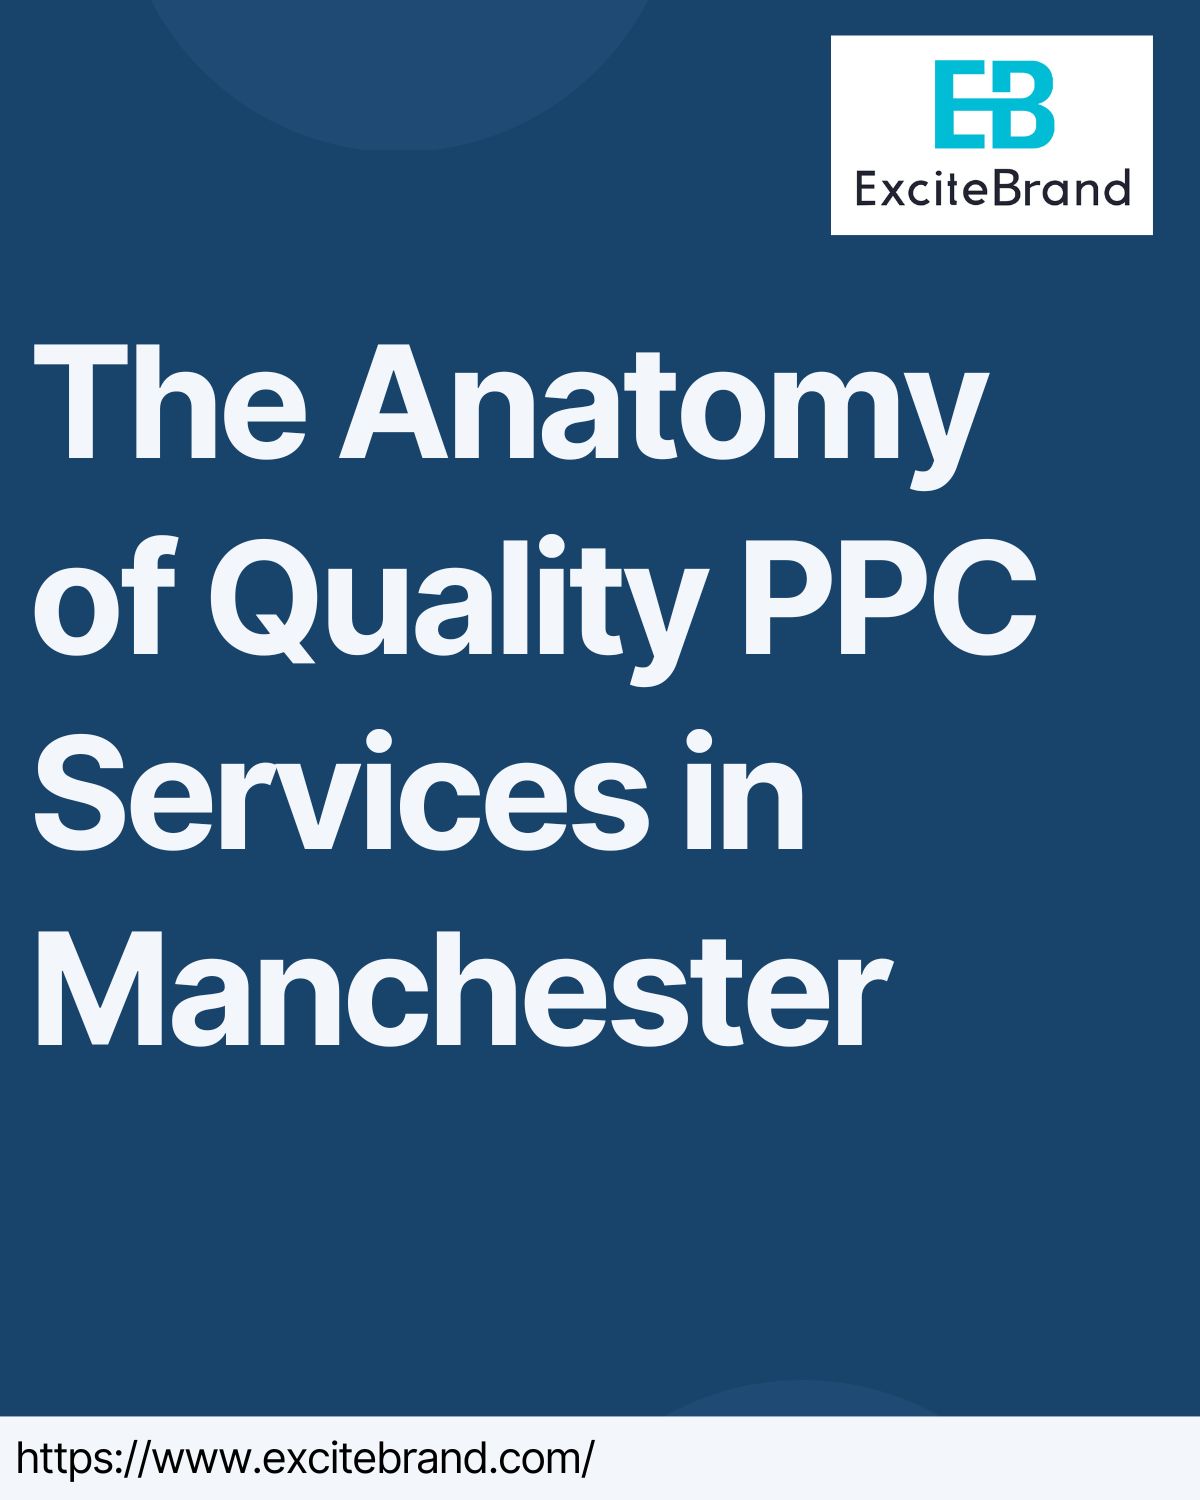 The Anatomy of Quality PPC Services in Manchester